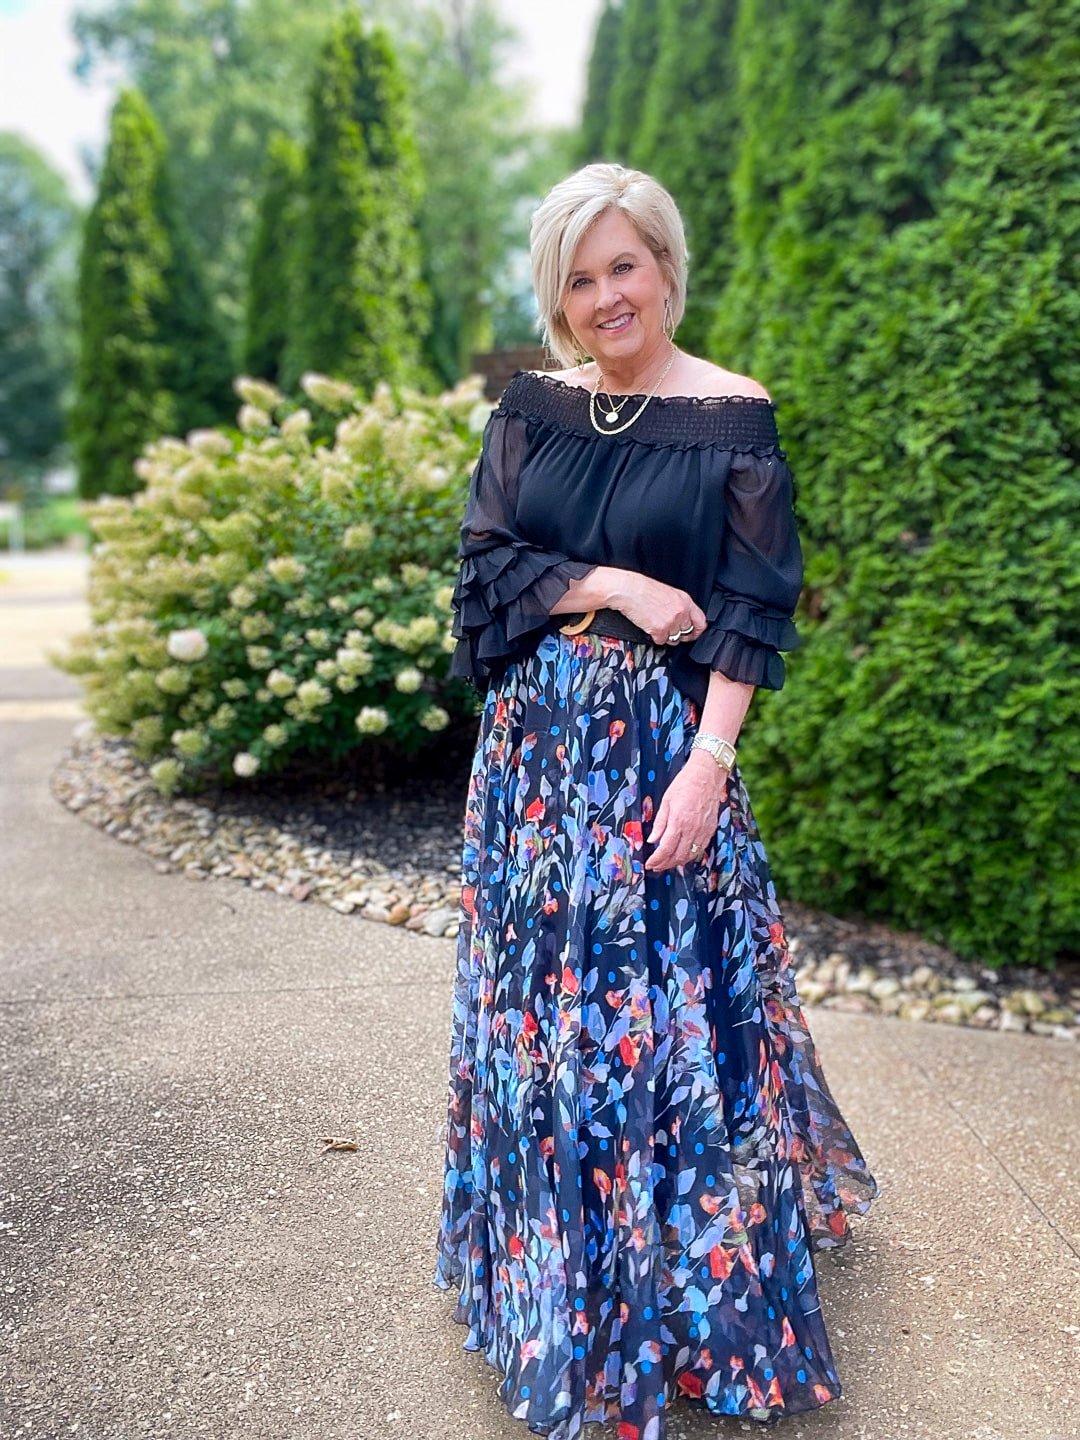 Over 40 Fashion Blogger, Tania Stephens is styling a floral chiffon skirt for a fall wedding17